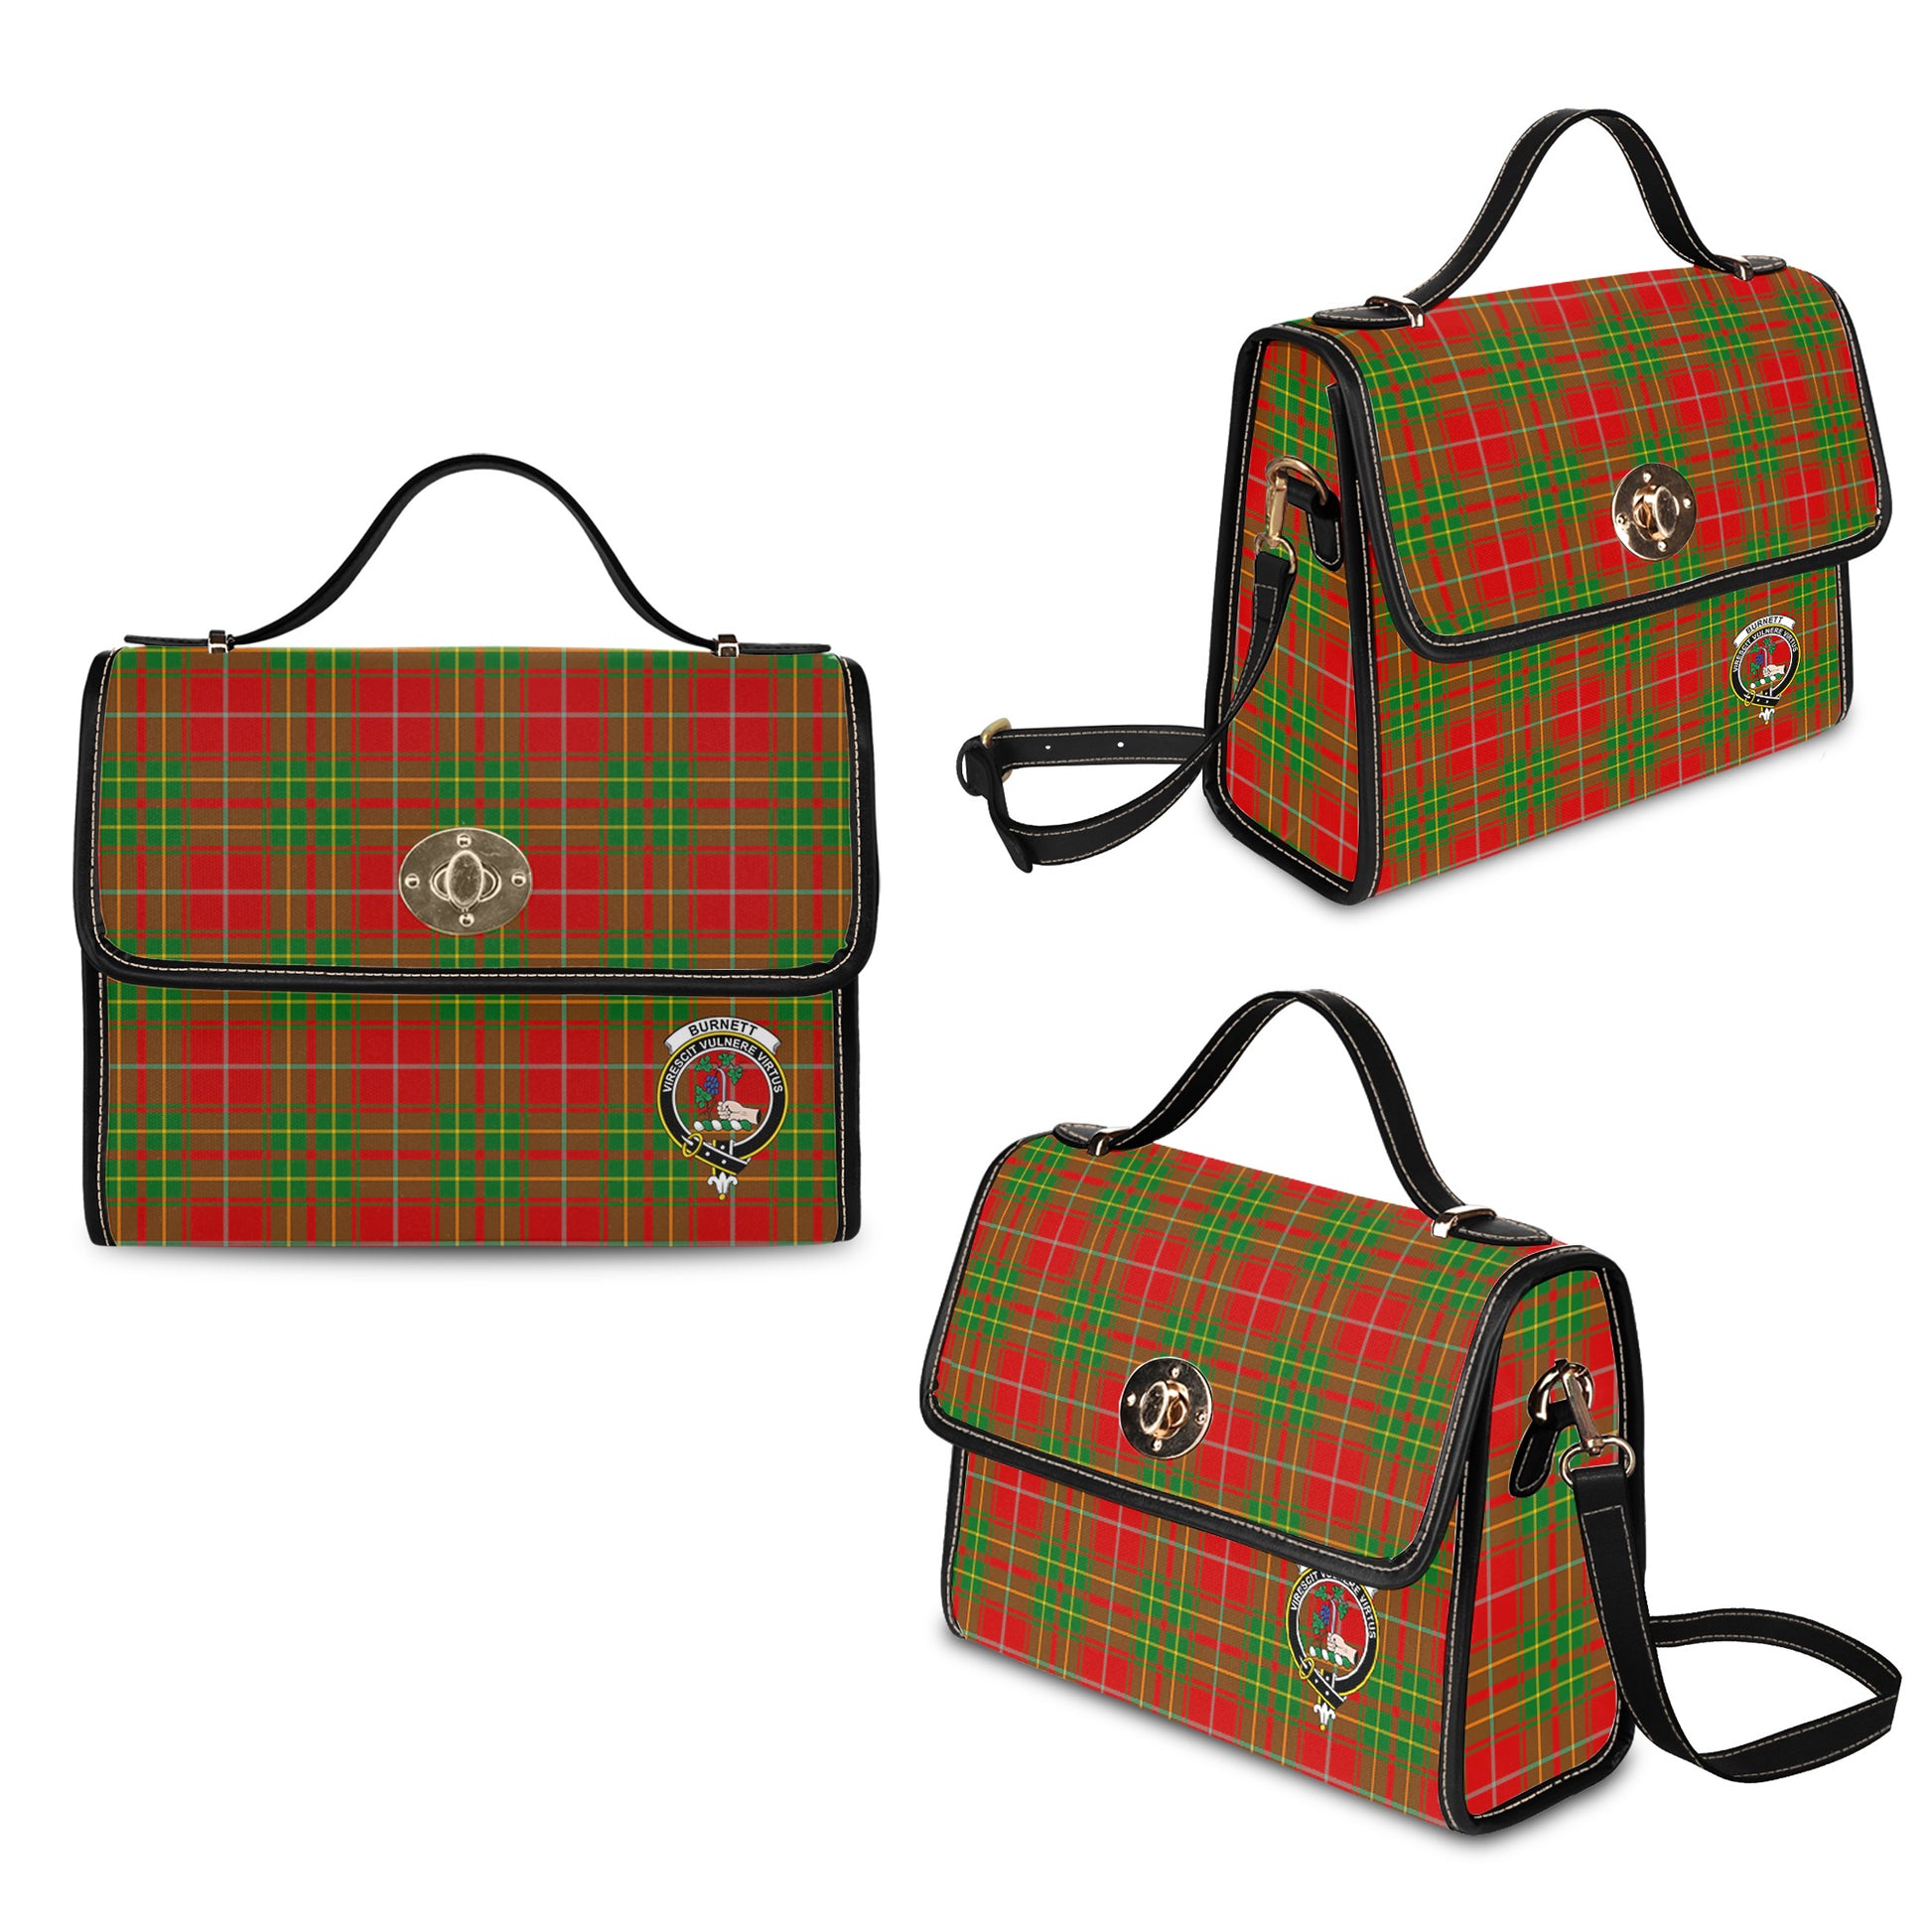 Burnett Ancient Tartan Leather Strap Waterproof Canvas Bag with Family Crest